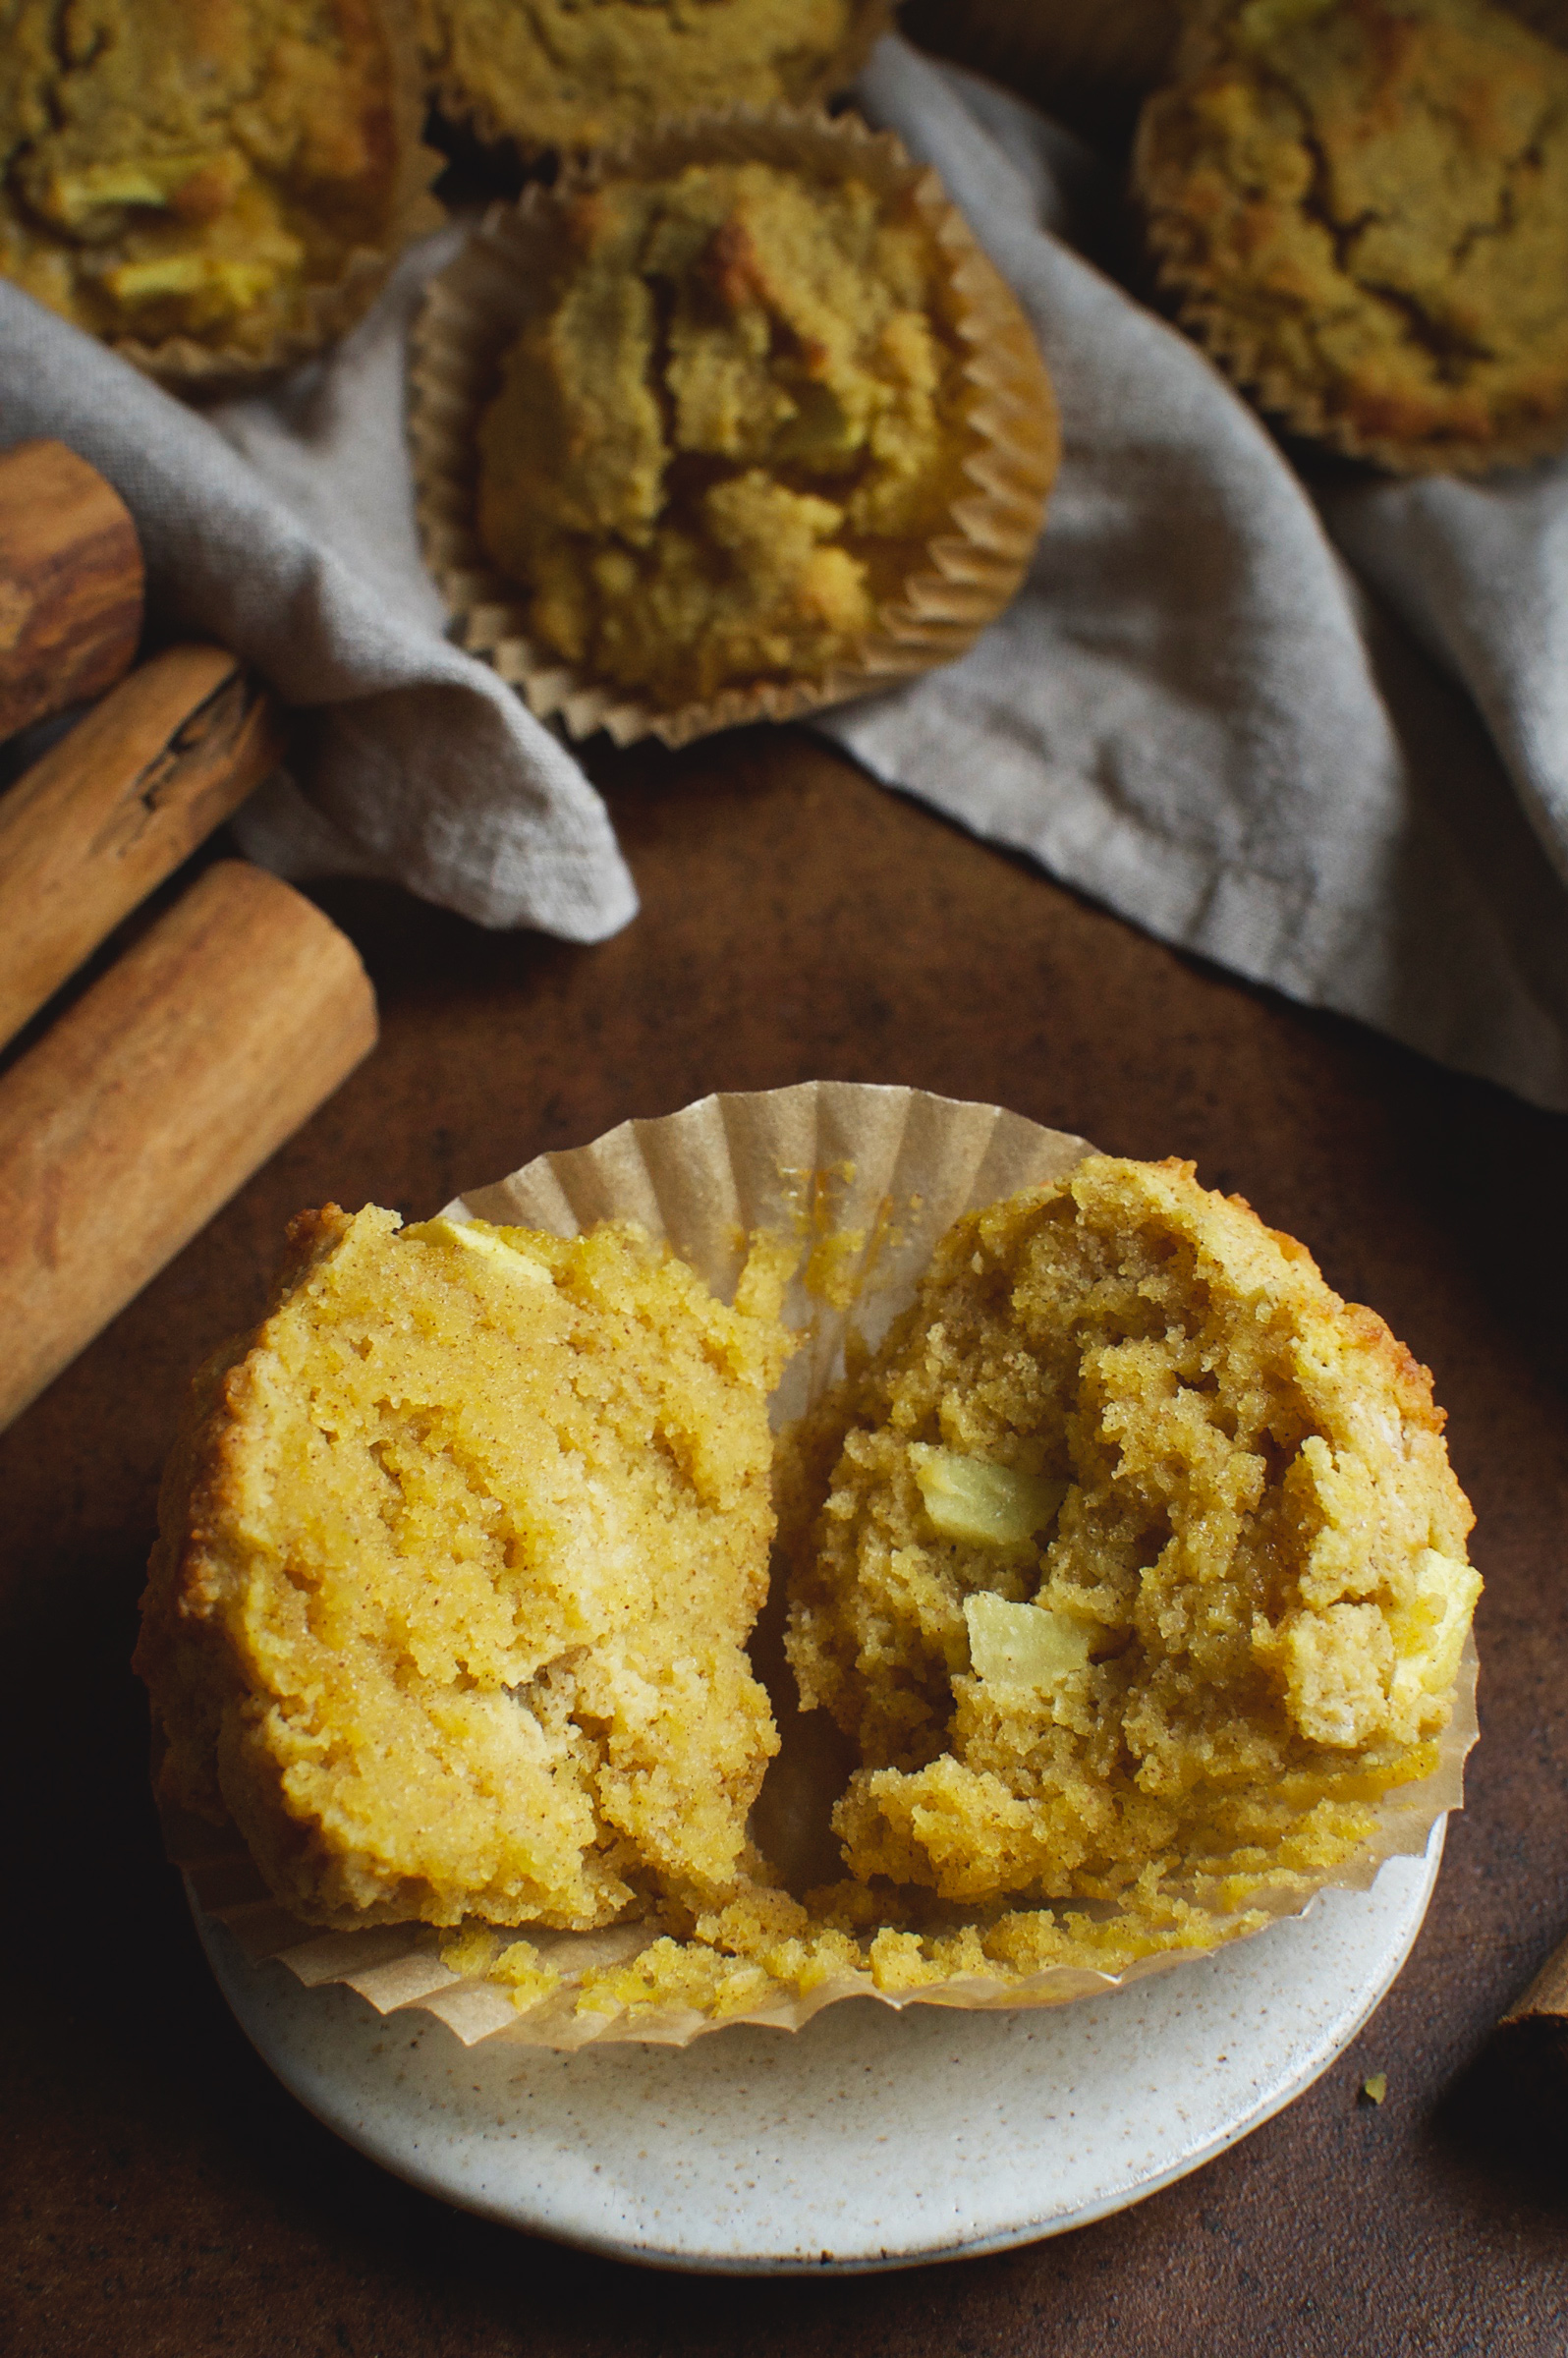  Low-Carb Cinnamon Apple Spice Muffins 